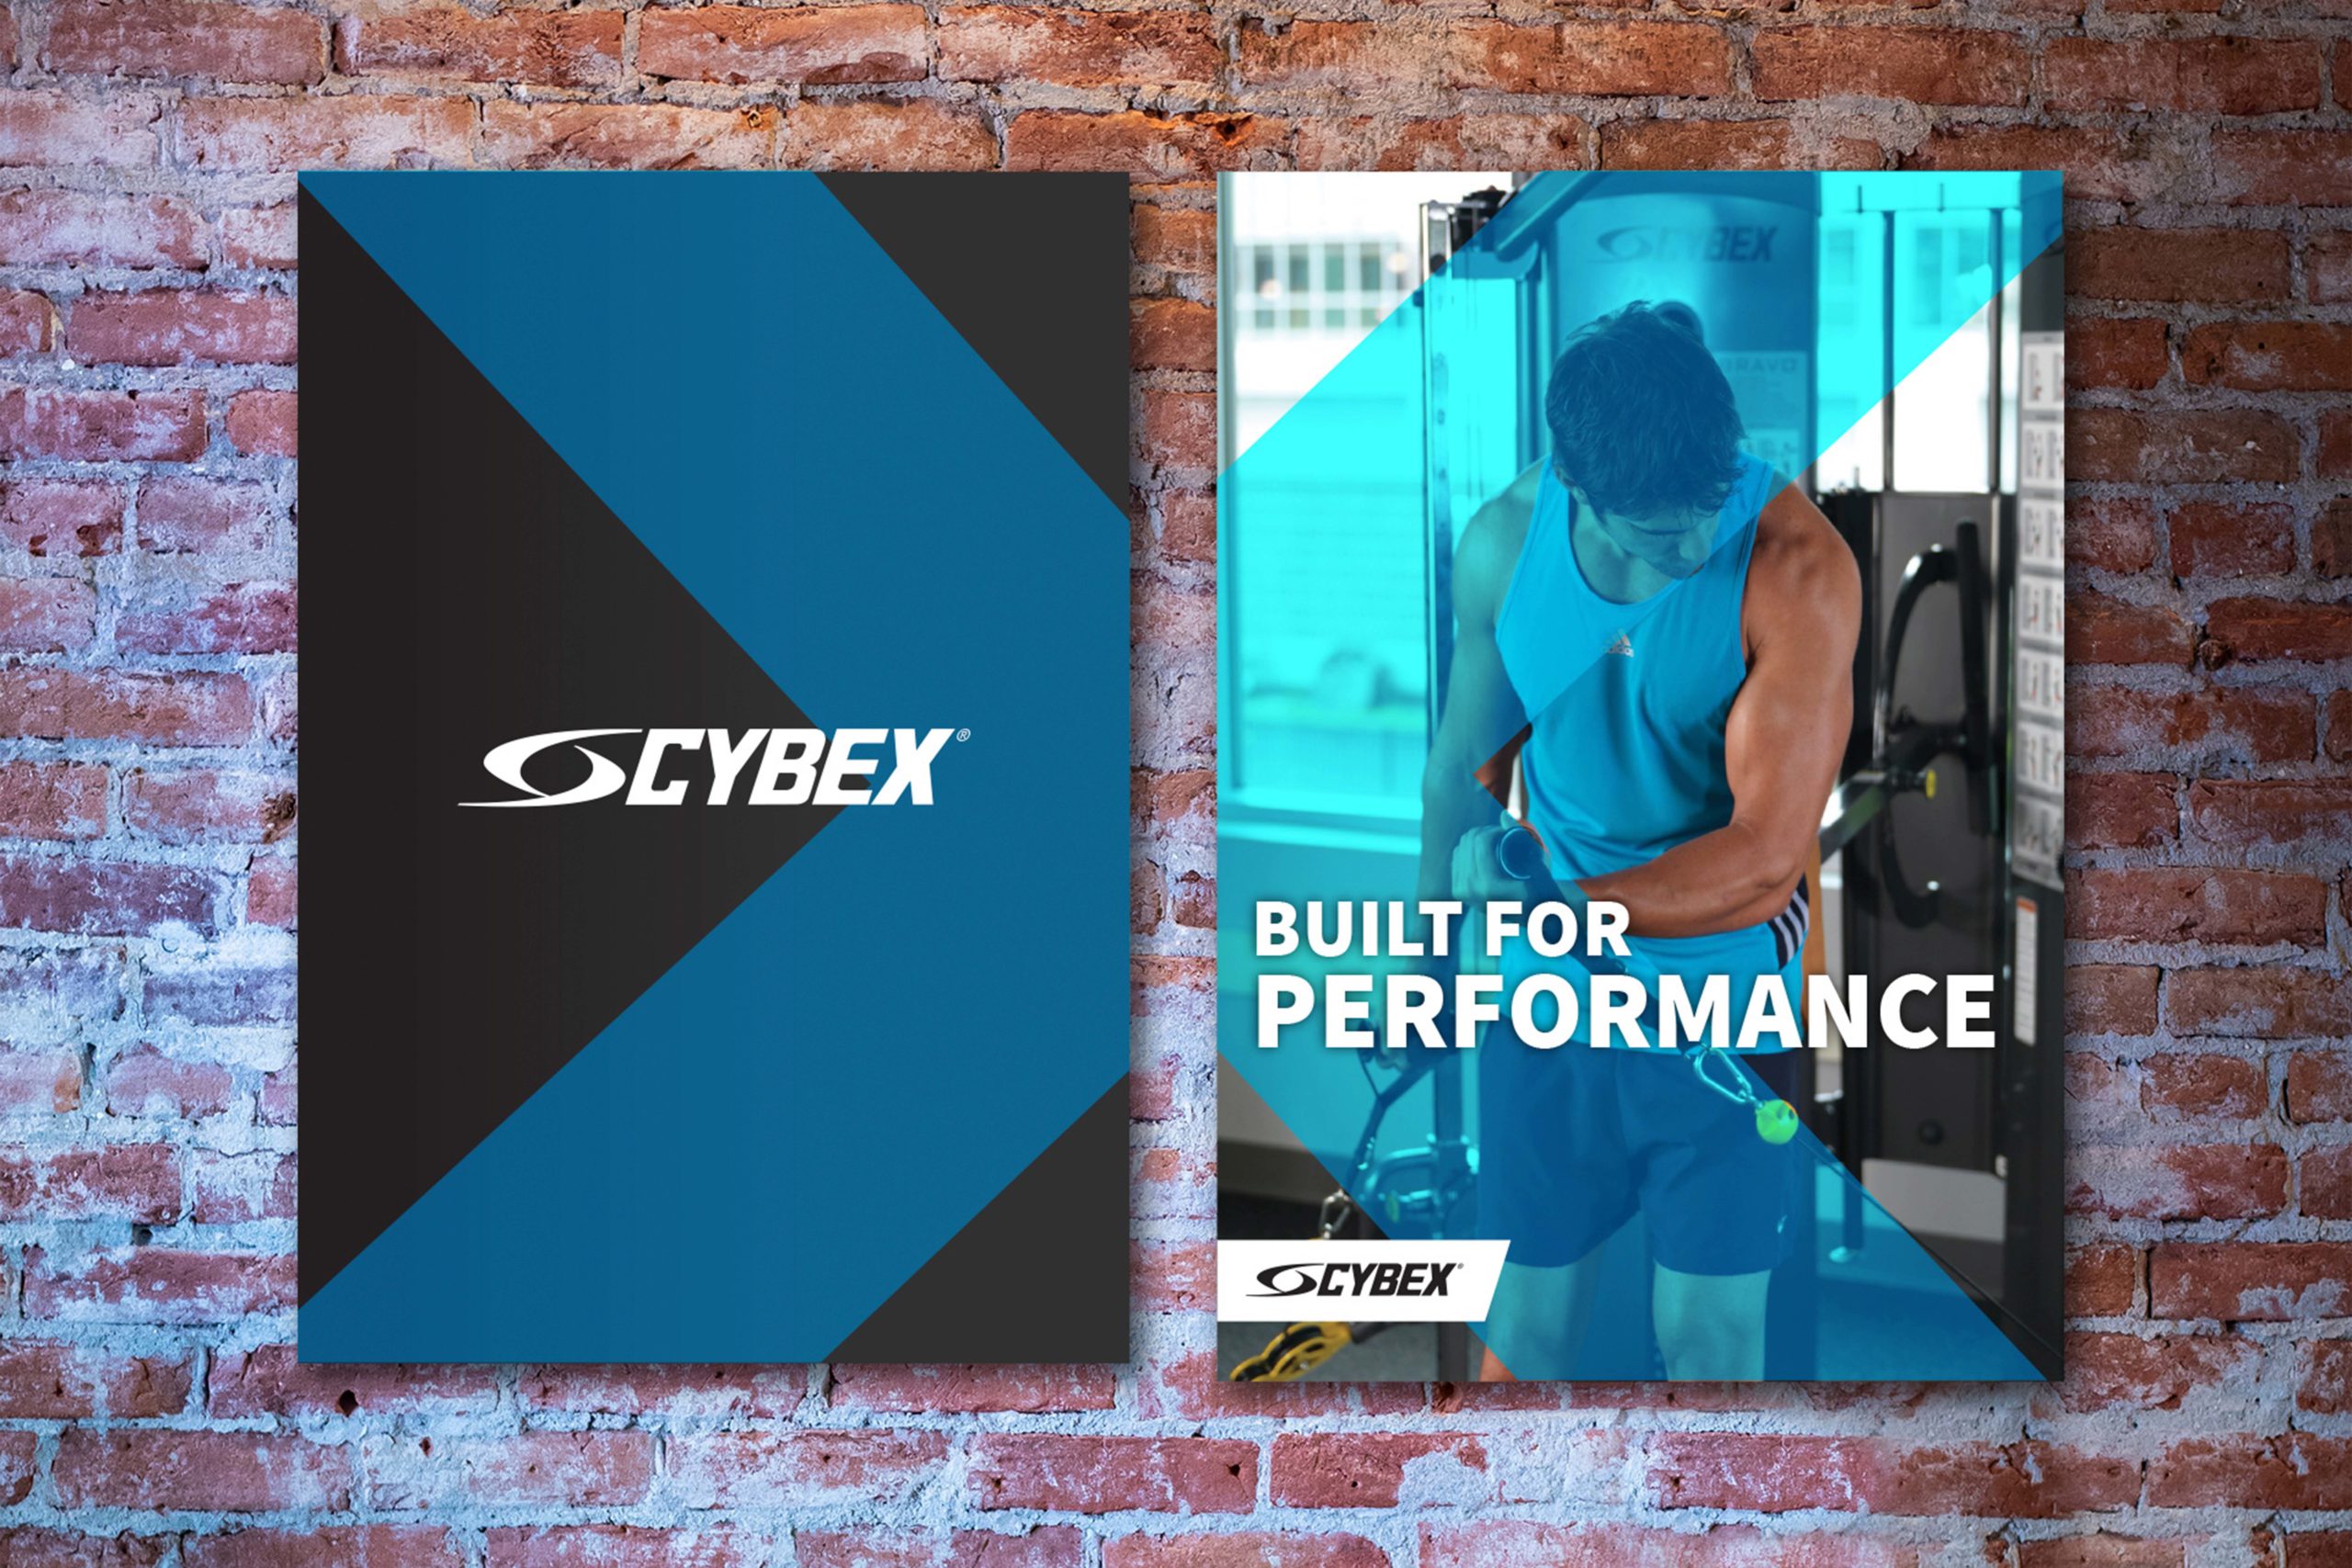 Cybex Marketing Campaing By ipulse Build For Performance Poster Design Behind Rustic Brick Wall